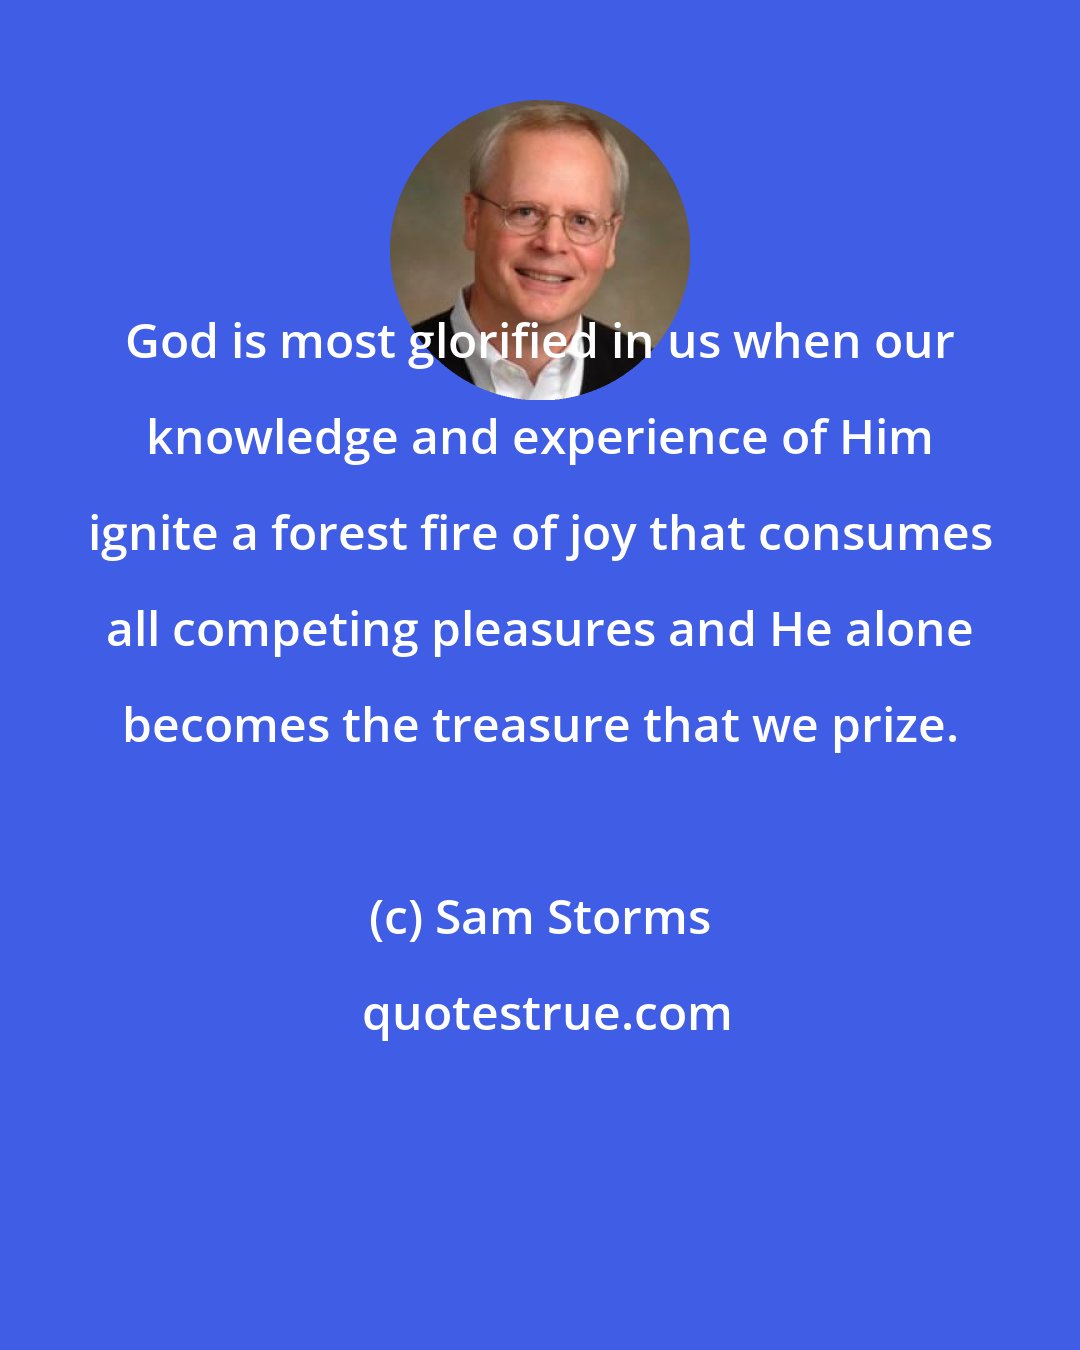 Sam Storms: God is most glorified in us when our knowledge and experience of Him ignite a forest fire of joy that consumes all competing pleasures and He alone becomes the treasure that we prize.